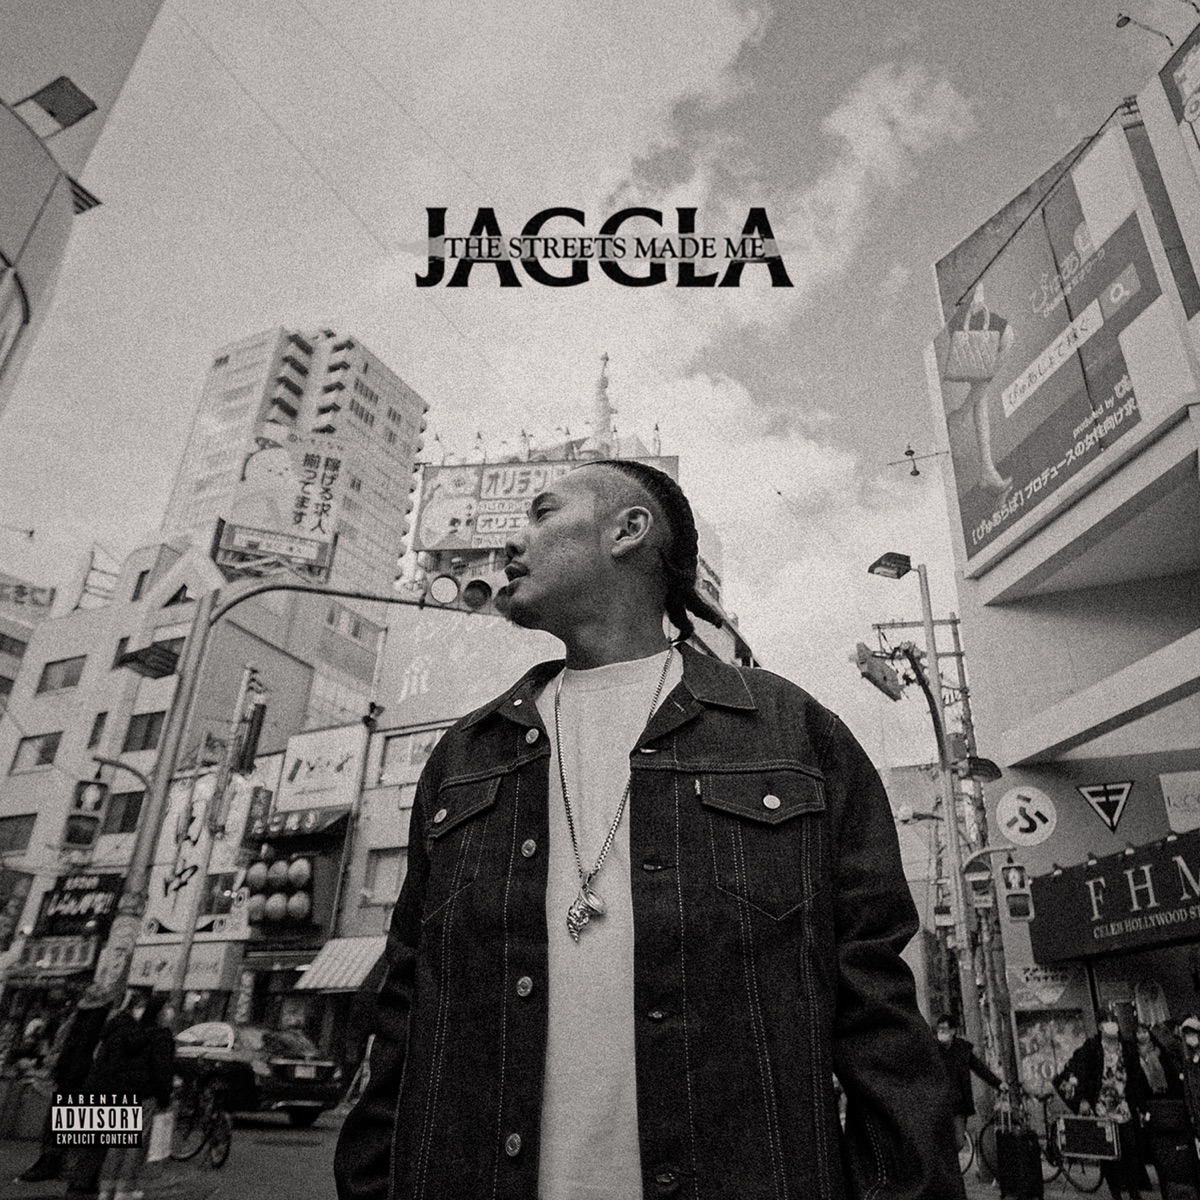 『JAGGLA - The Streets Made Me (Remix) [feat. 孫GONG, REAL-T & Young Coco] 歌詞』収録の『The Streets Made Me』ジャケット